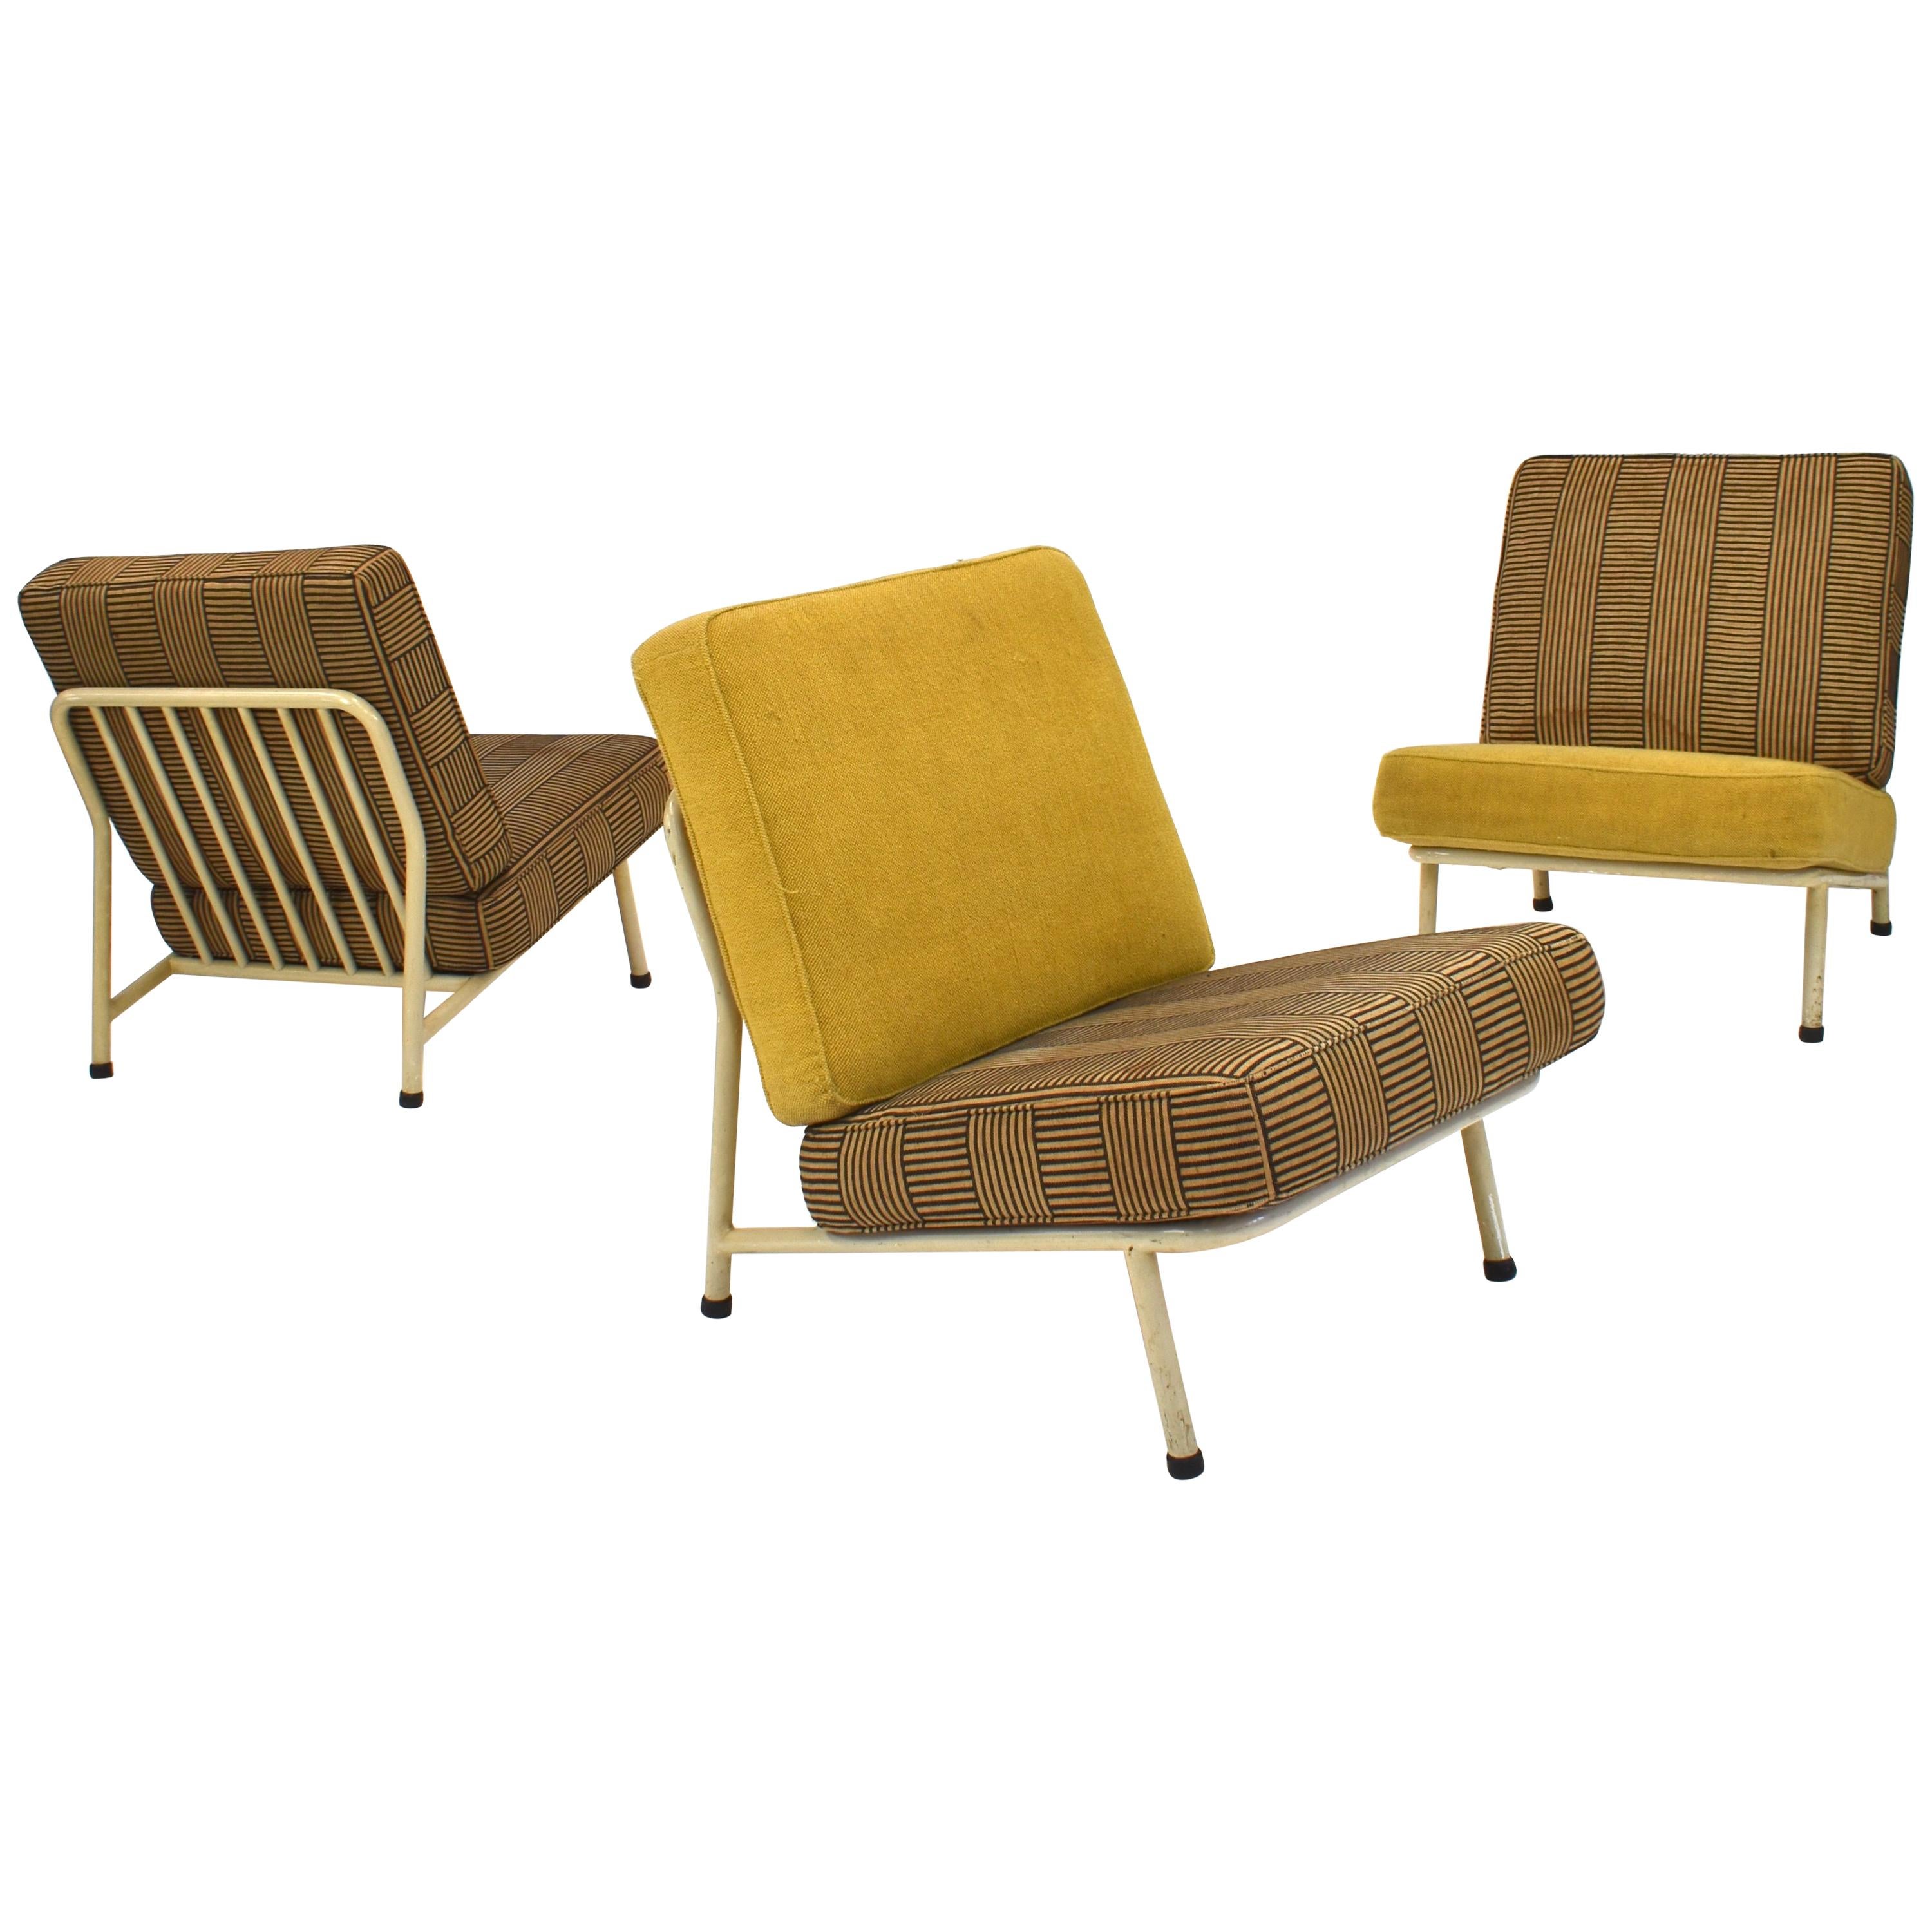 Set of Three Alf Svensson Lounge Chairs for DUX, Sweden, circa 1950